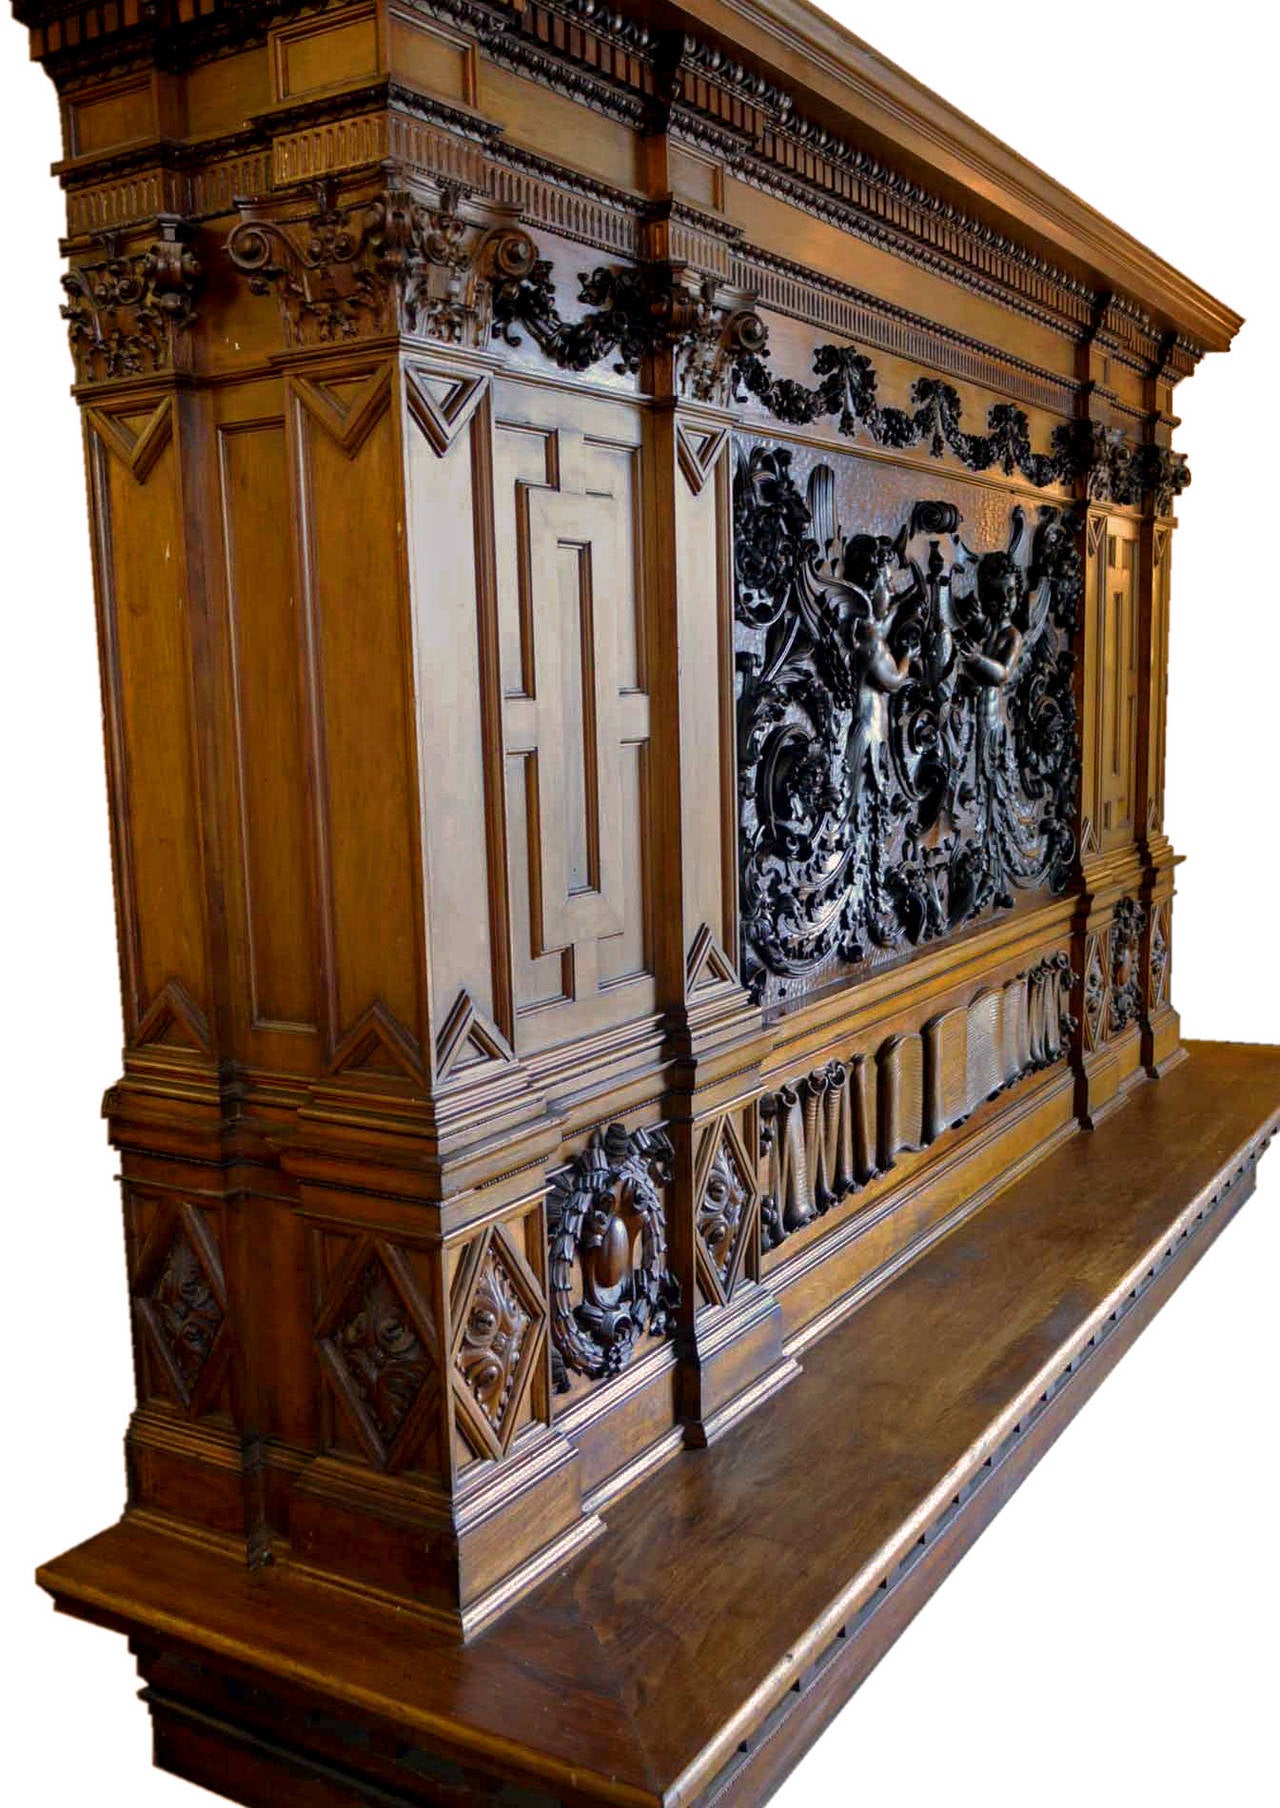 This hand-carved American beaux-art overmantel, created in the late 19th century is an superb example of American craftsmanship and originality. The creator infused classical Greco-Roman Architecture and the Italian Renaissance, as well as English